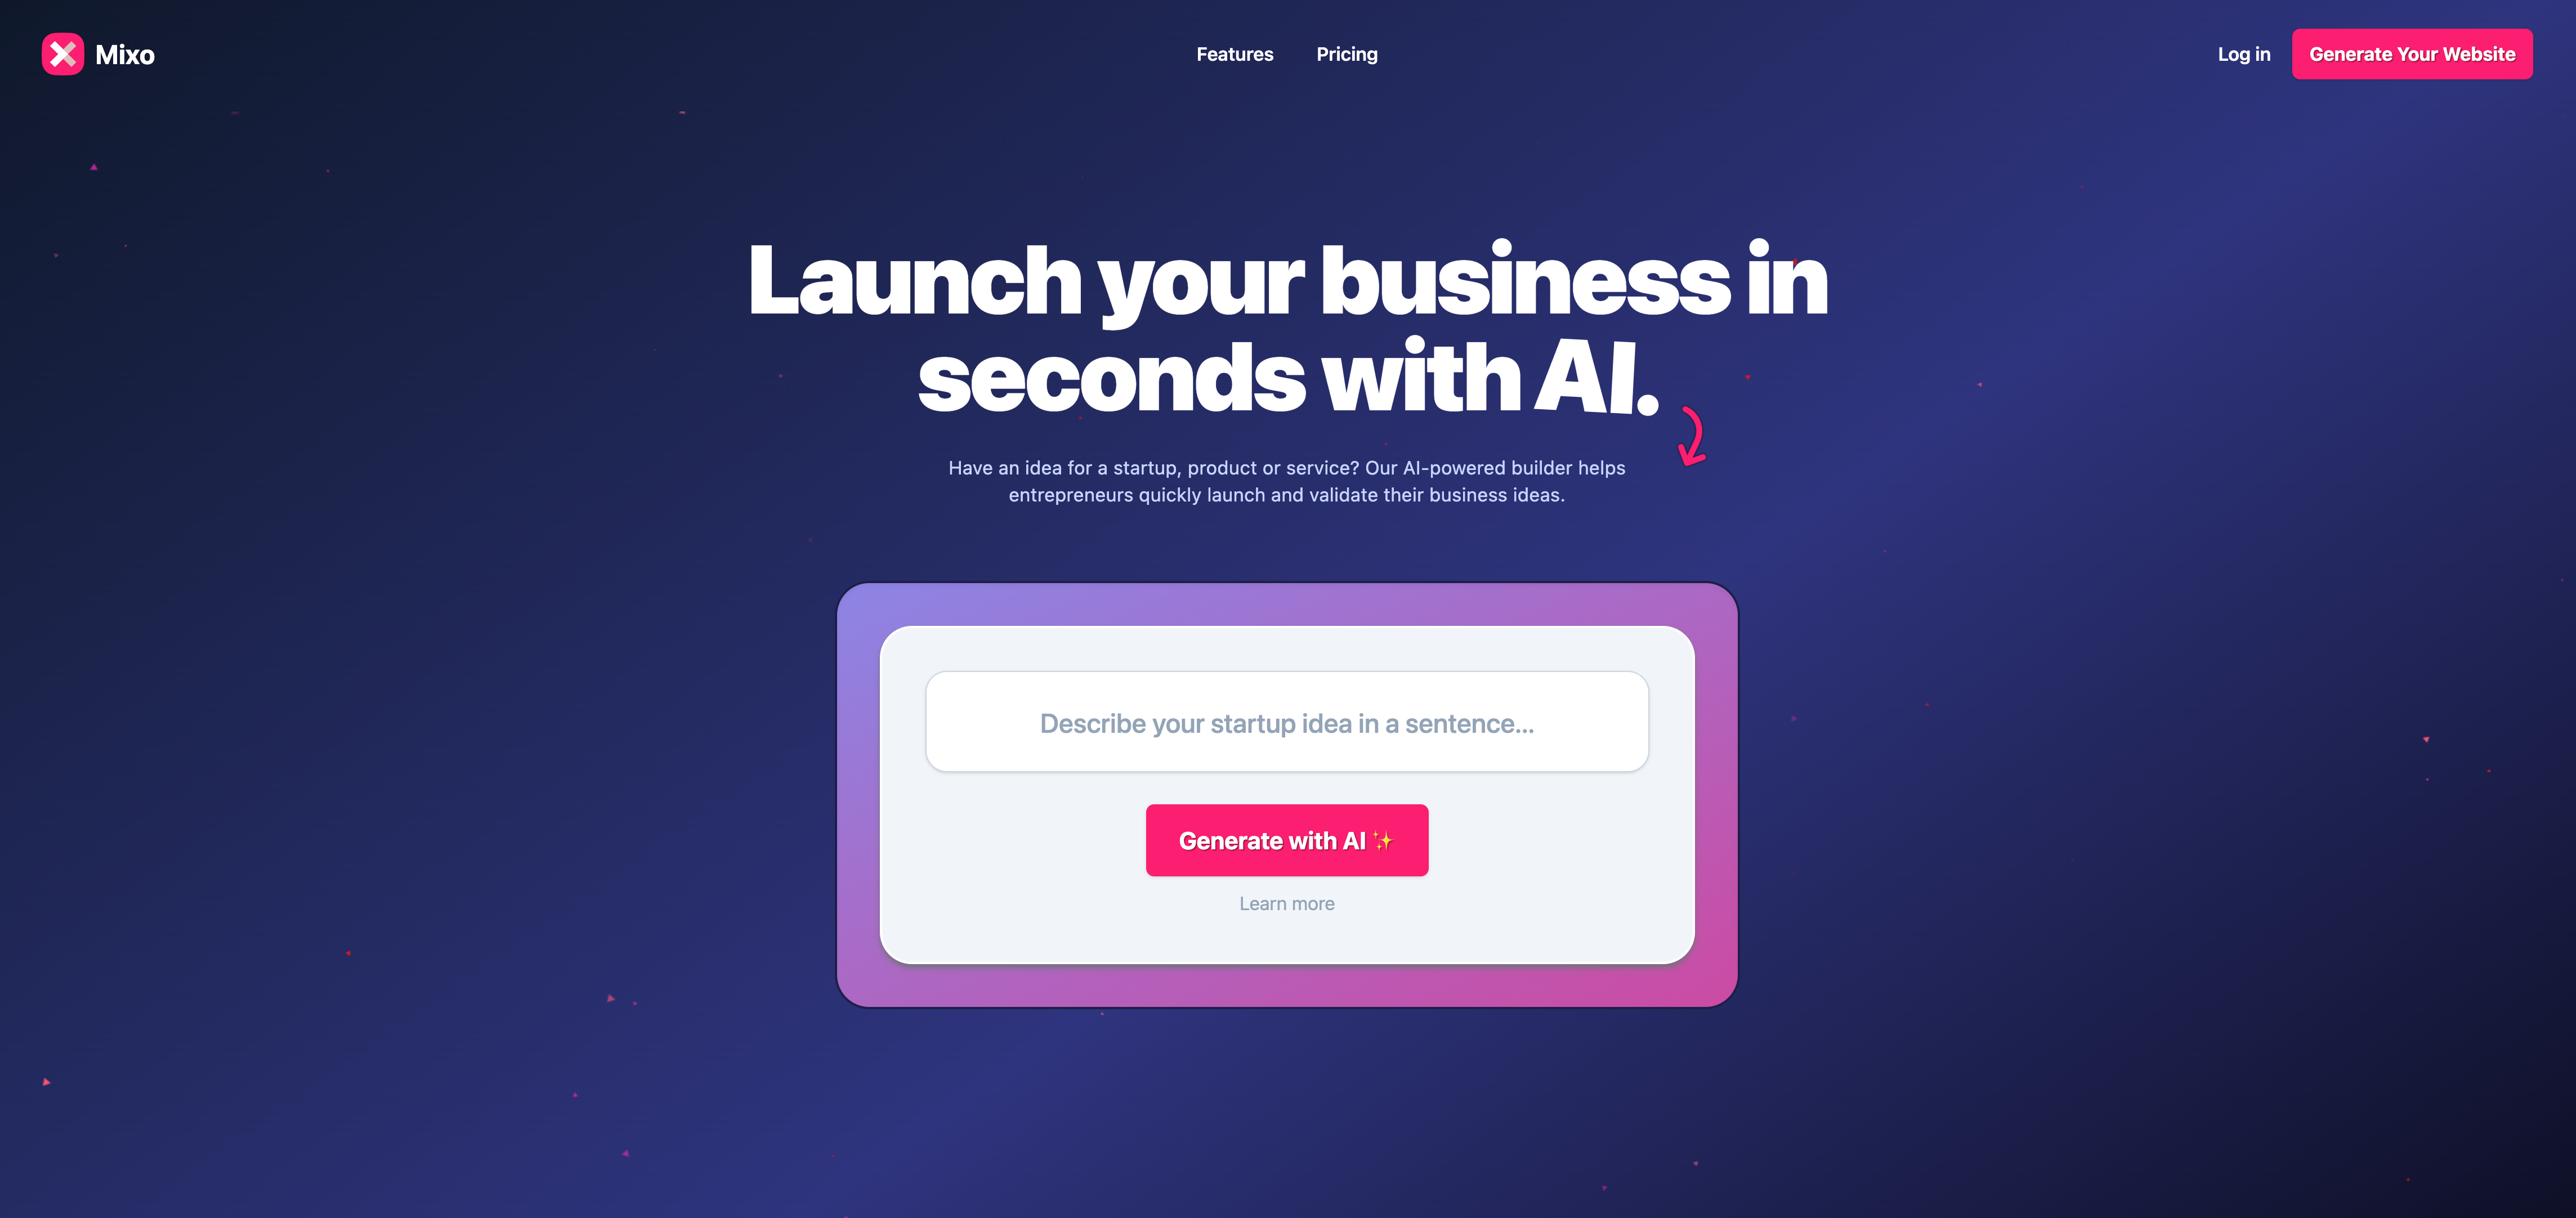 Mixo is an AI-powered platform that swiftly creates, designs, and optimizes business websites, making online presence seamless.